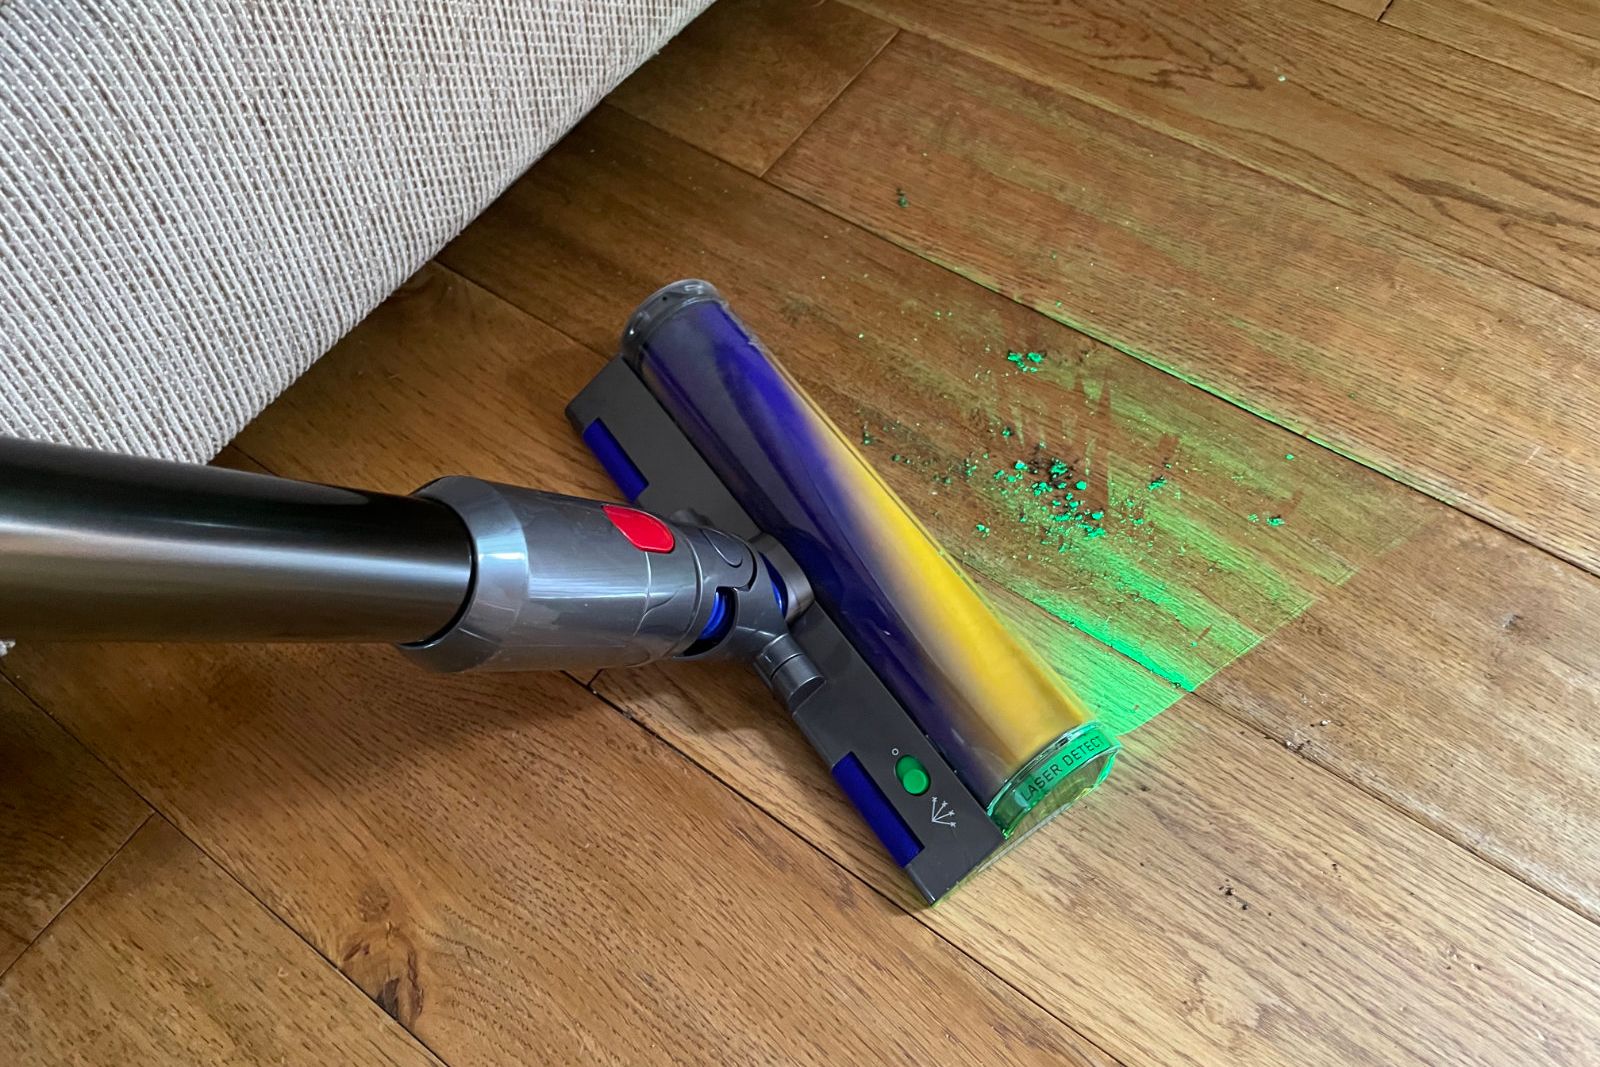 Dyson V15 Detect Absolute main images photo 9